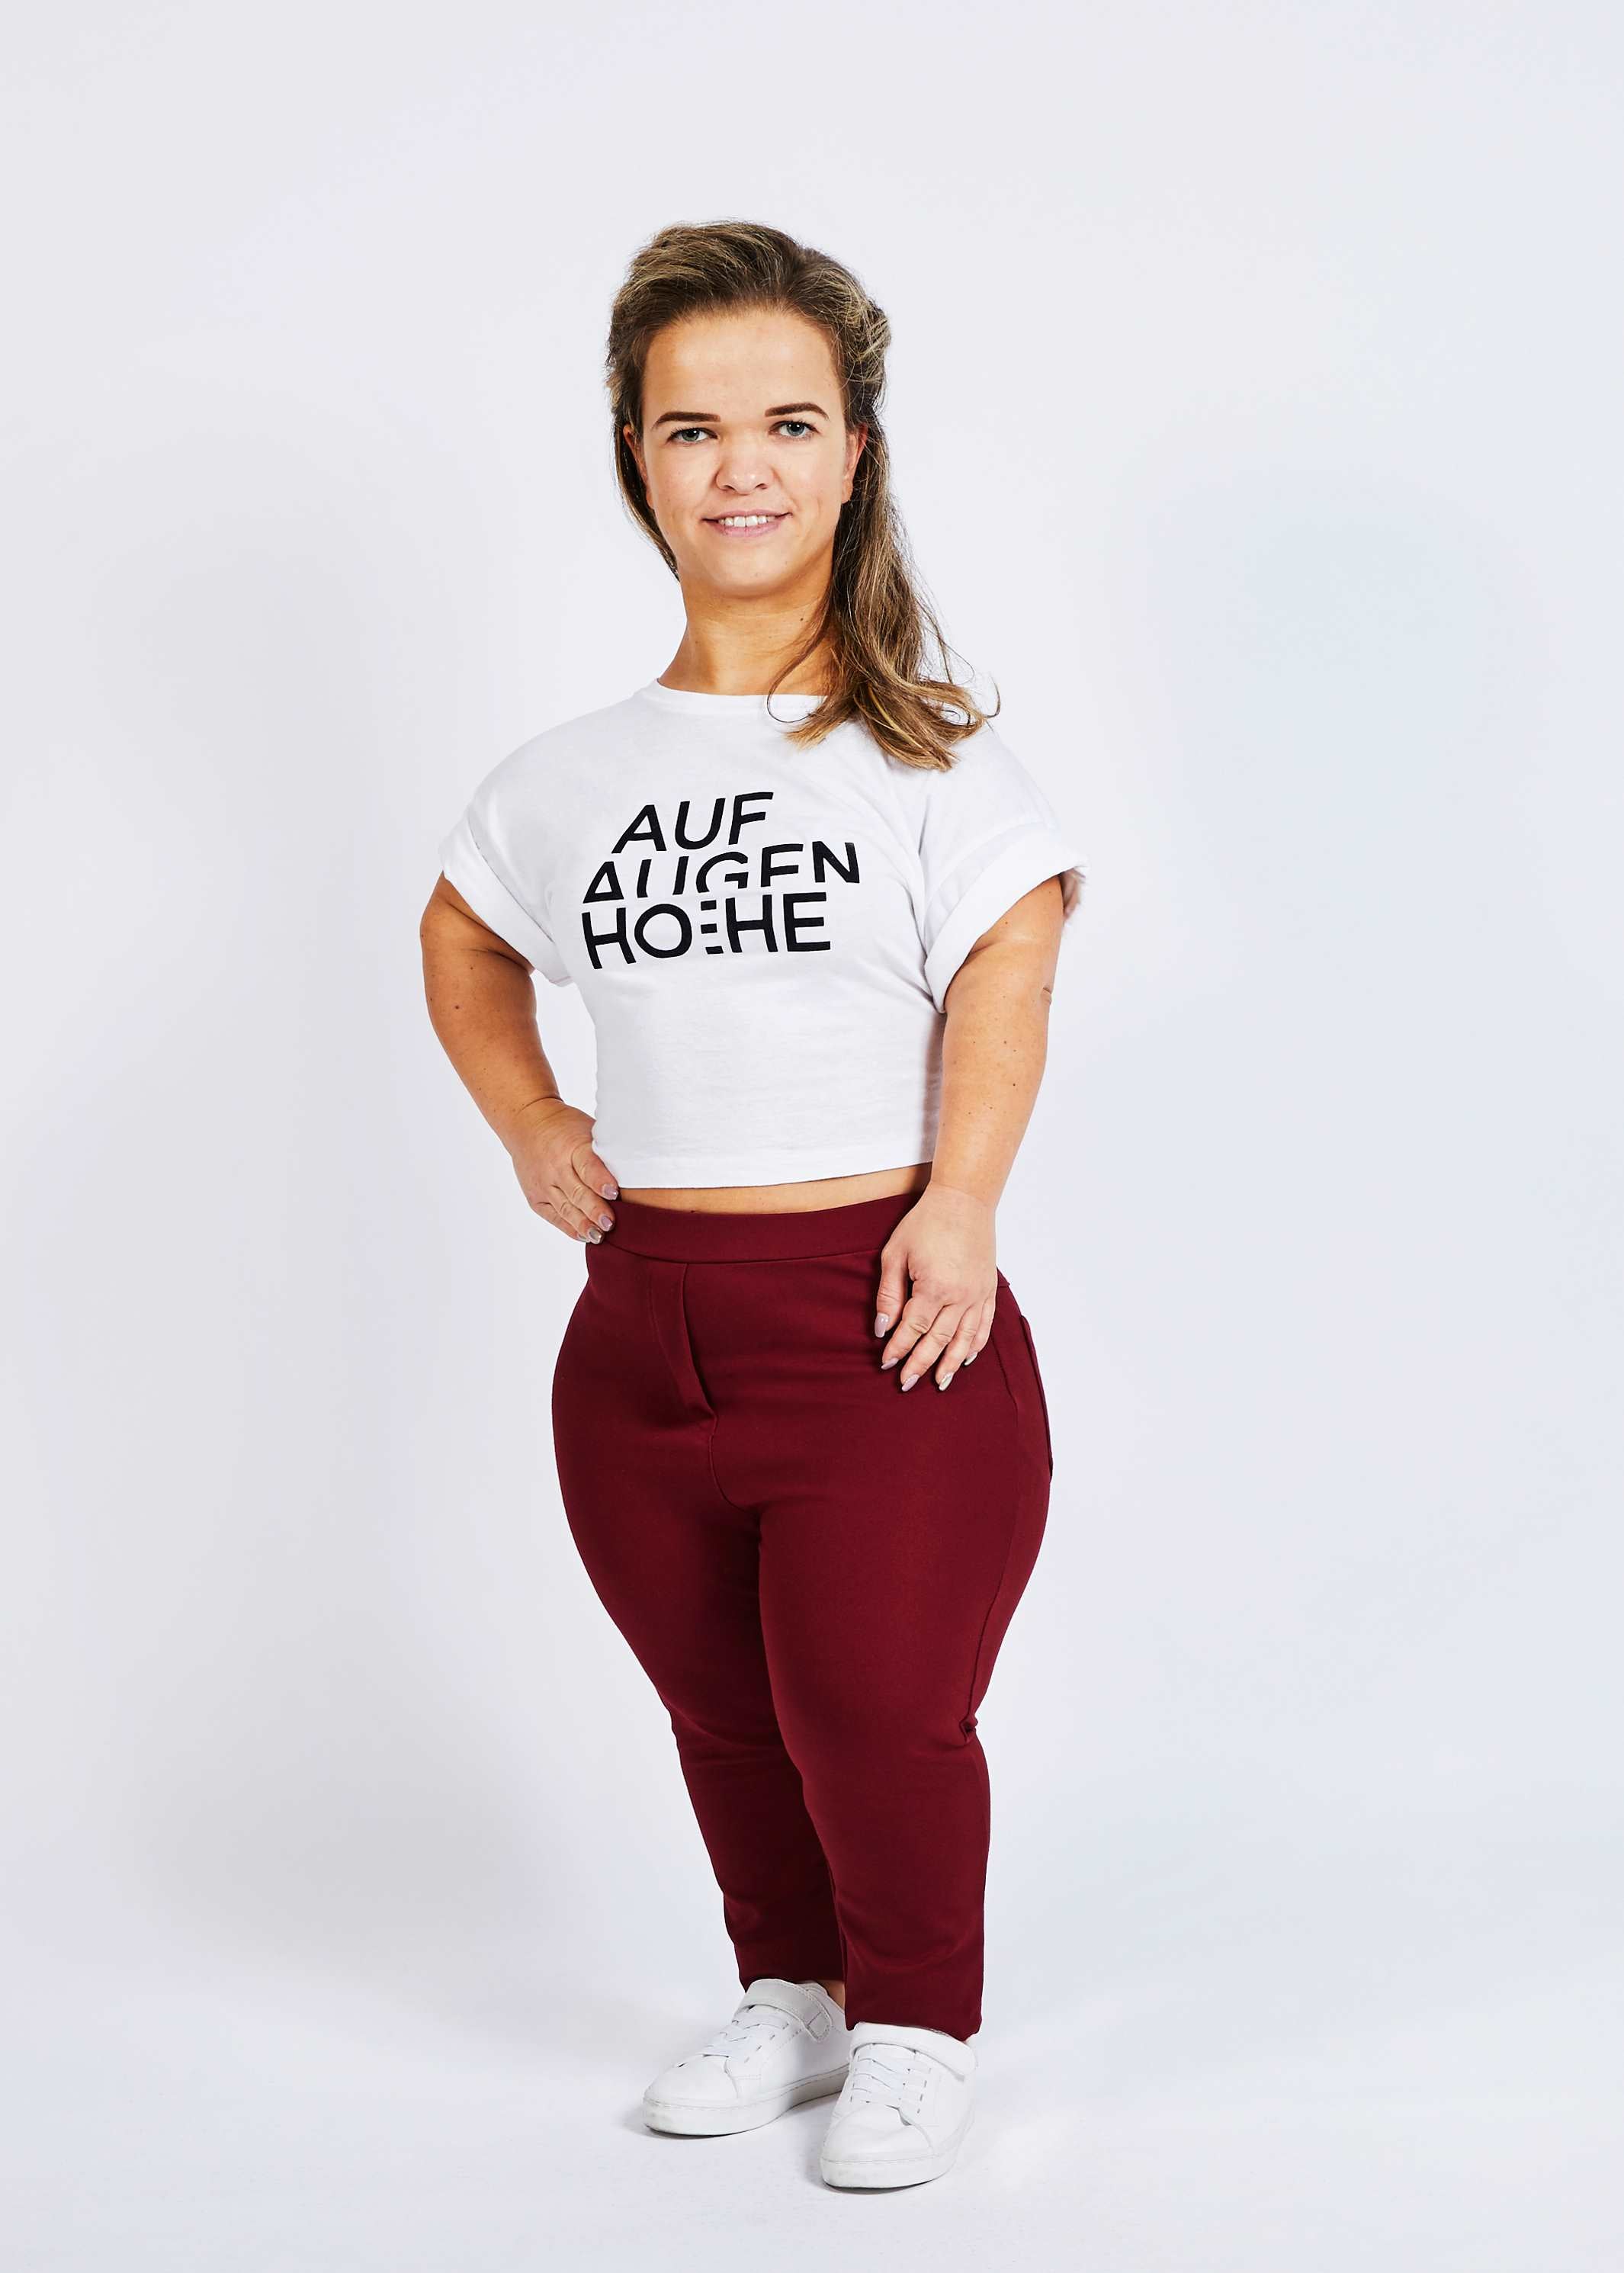 woman with dwarfism wearing wine red pants and white shirt